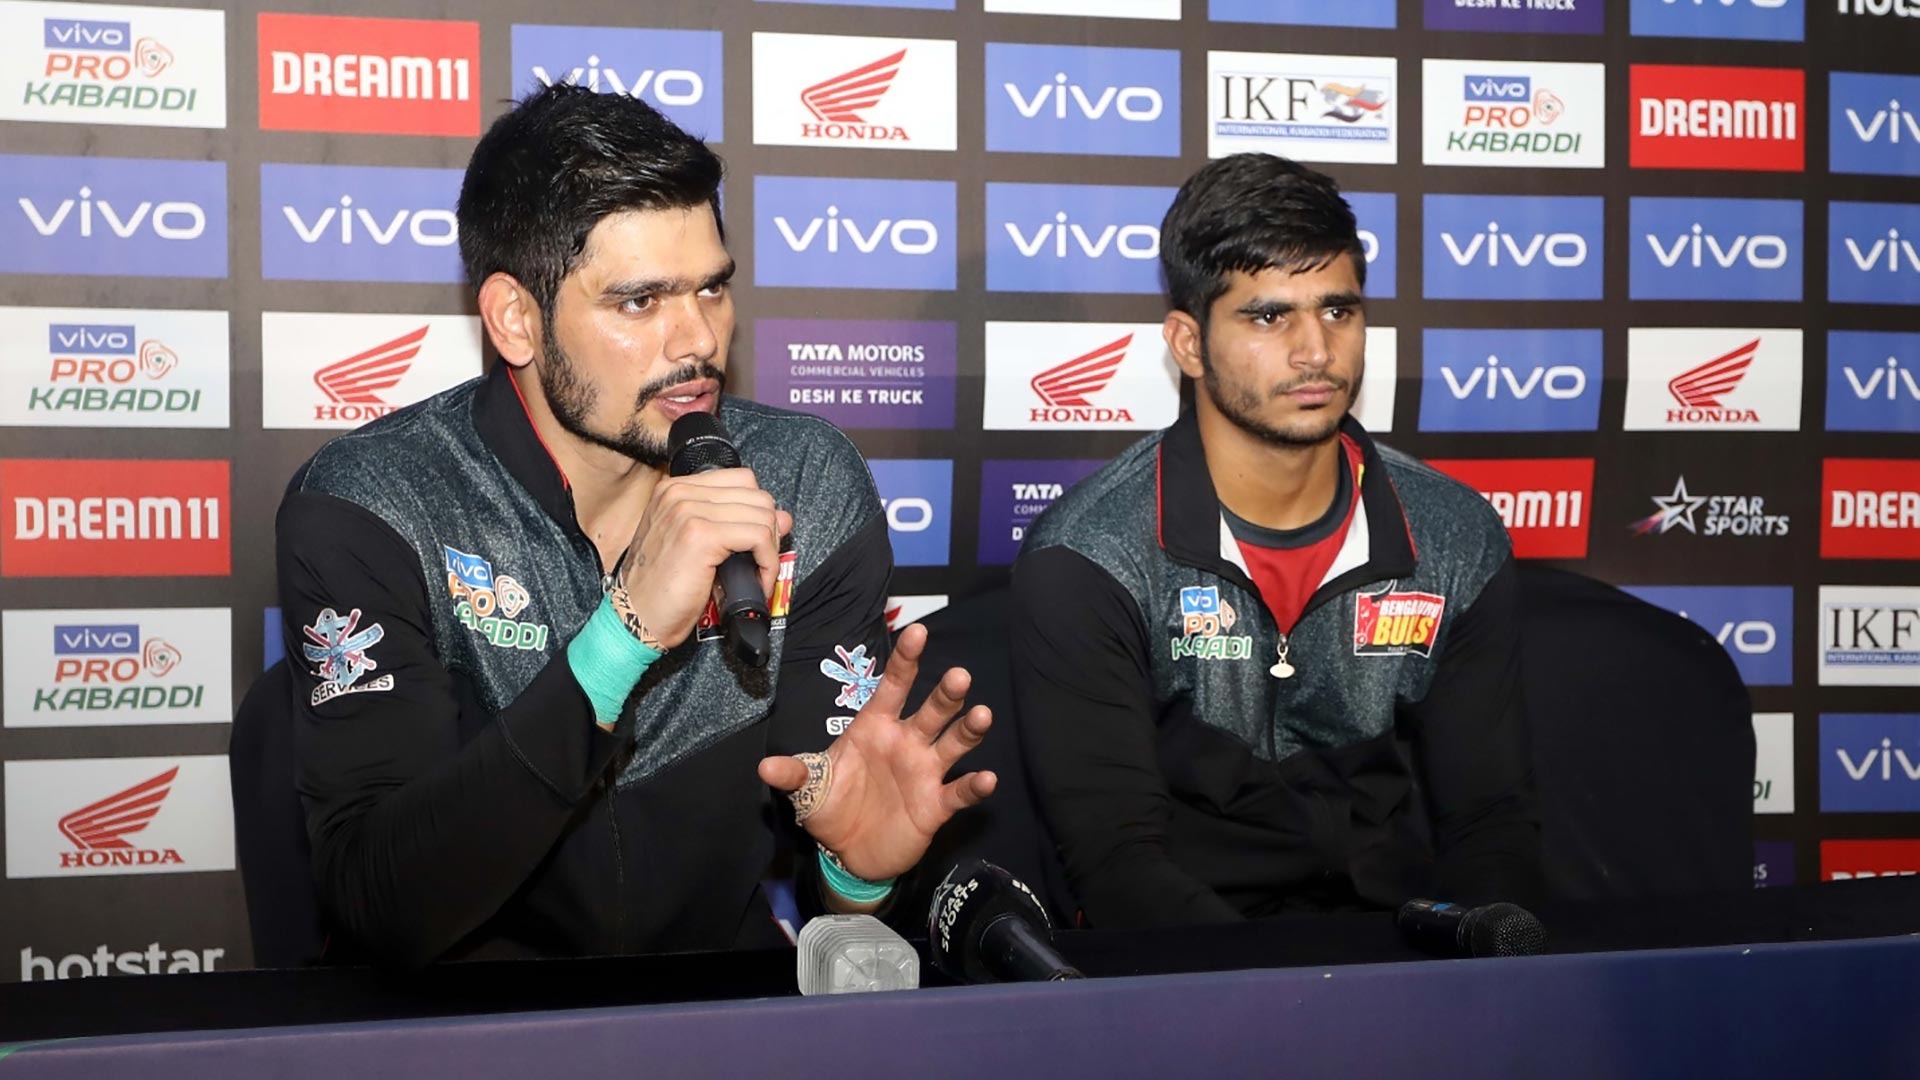 PKL 2019 | Result was not the one we hoped for, says Saurabh Nandal